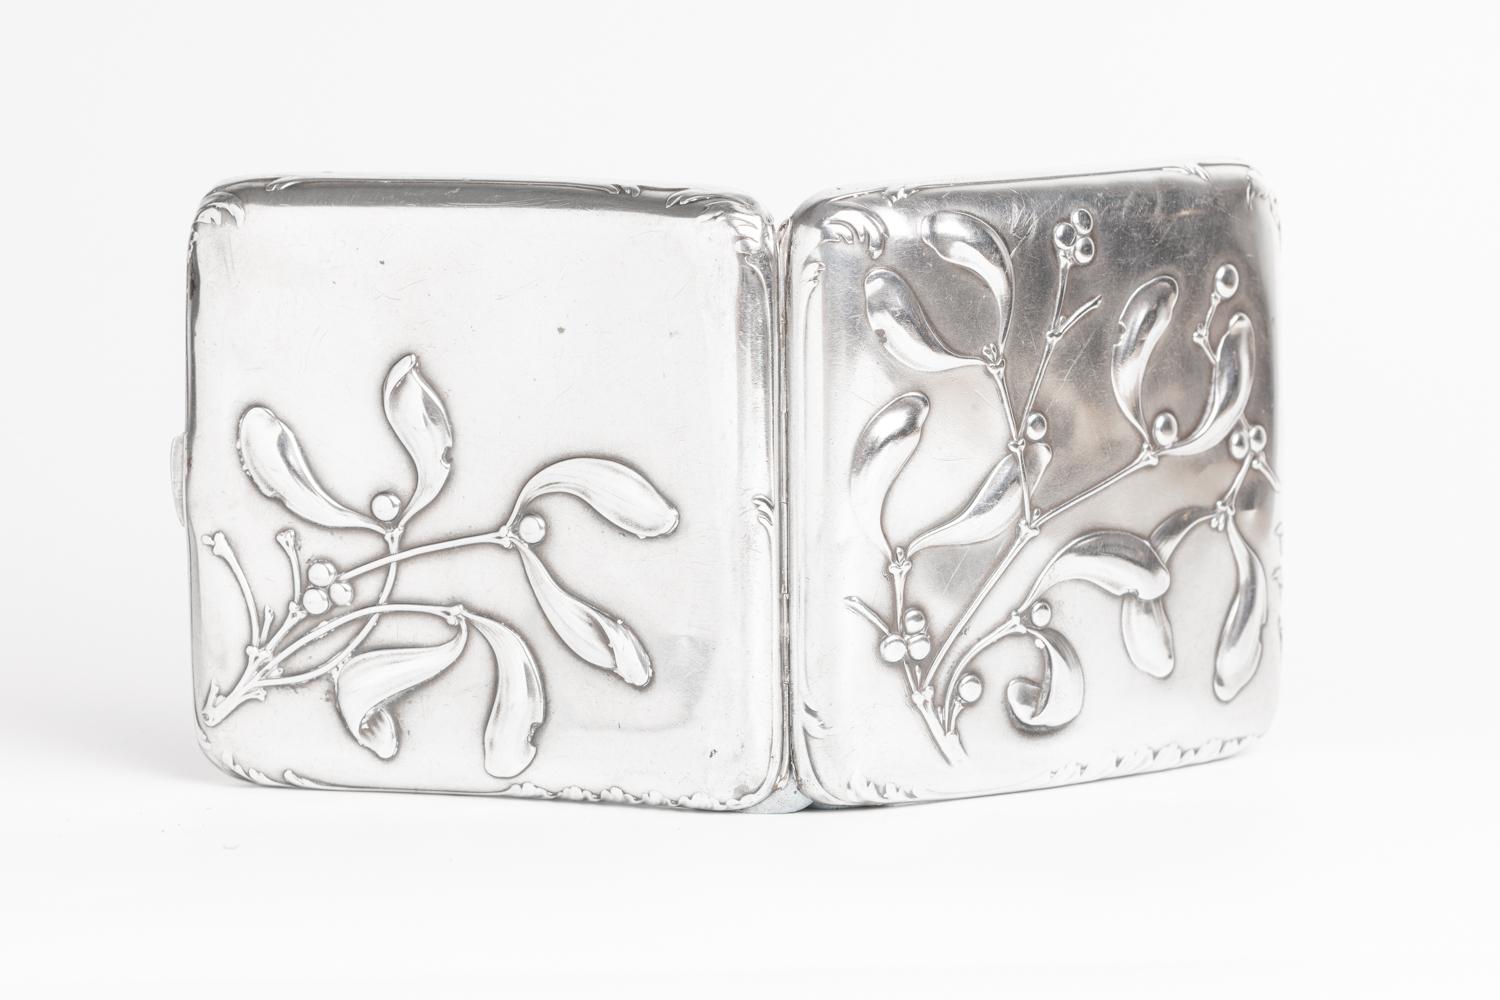  French Art Nouveau Silver Cigarette Case By Charles Murat In Good Condition For Sale In Portland, GB